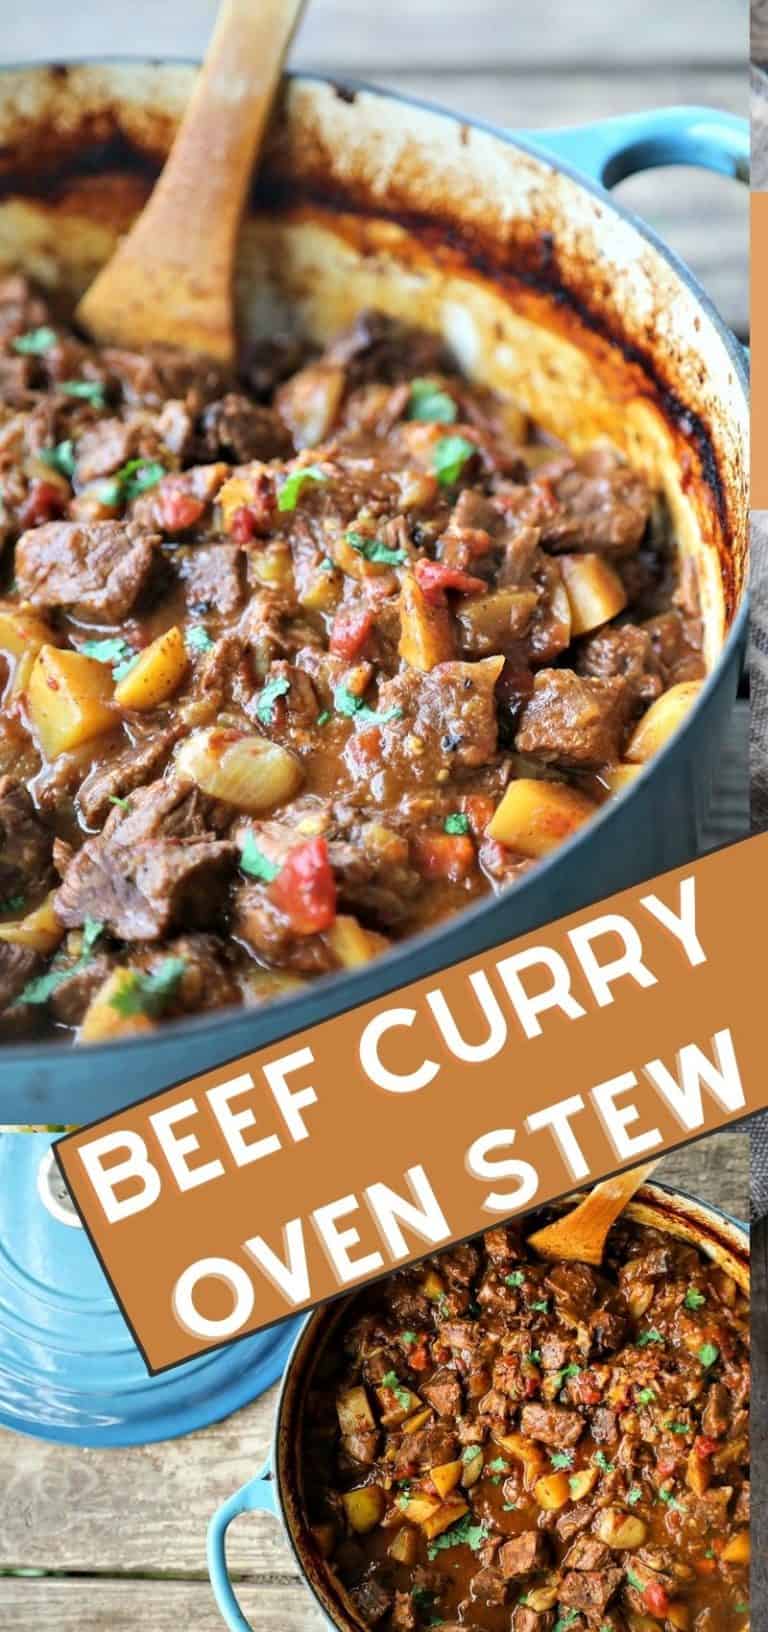 Curried Beef Oven Stew